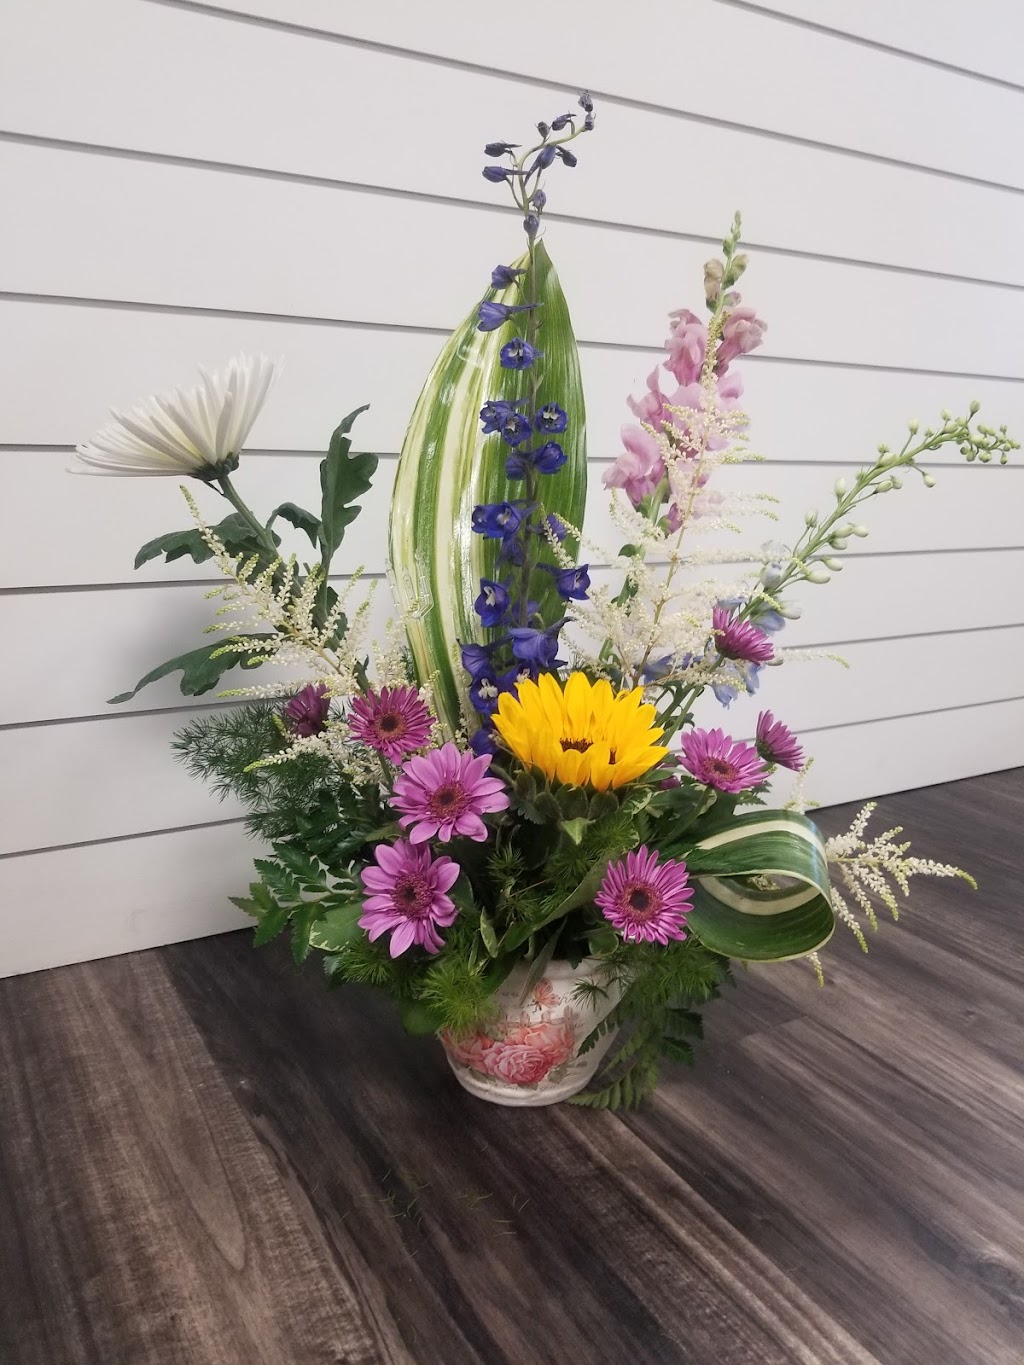 A Country Flower Shoppe and More | 420 NJ-34 Suite 305, Colts Neck, NJ 07722 | Phone: (732) 866-6669